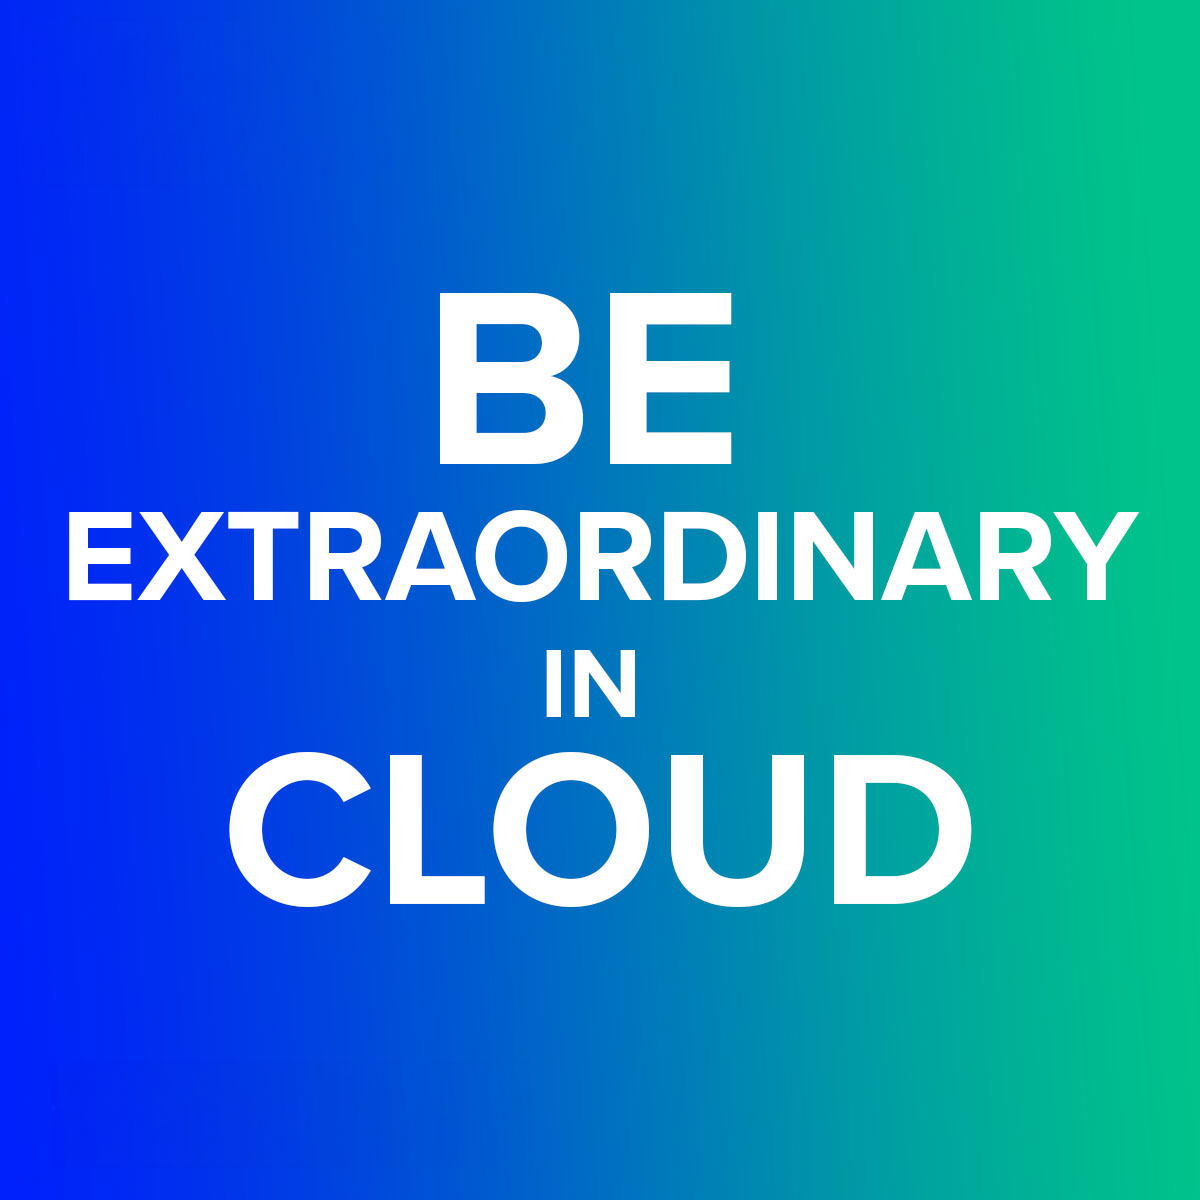 BE EXTRAORDINARY IN CLOUD